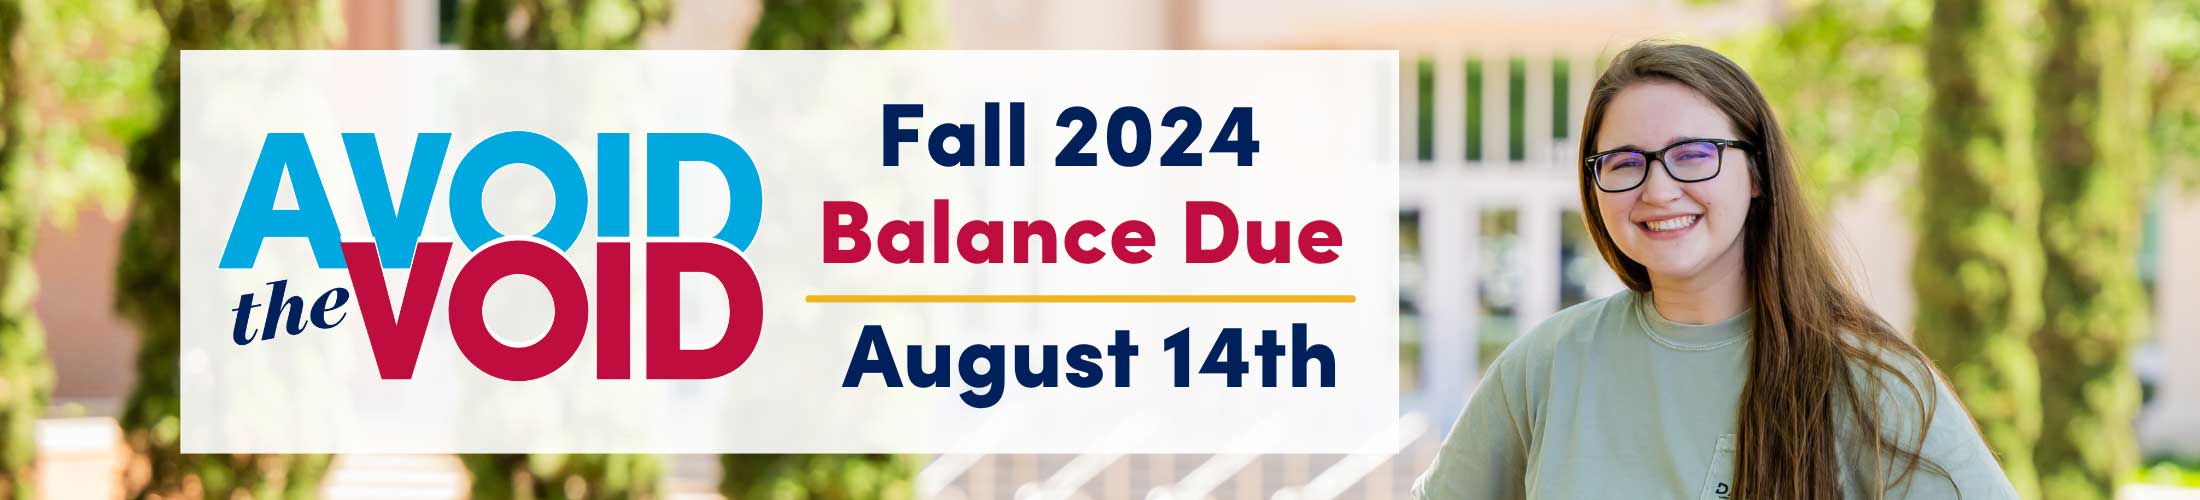 Avoid the Void Fall 2024 Balance Due August 14th